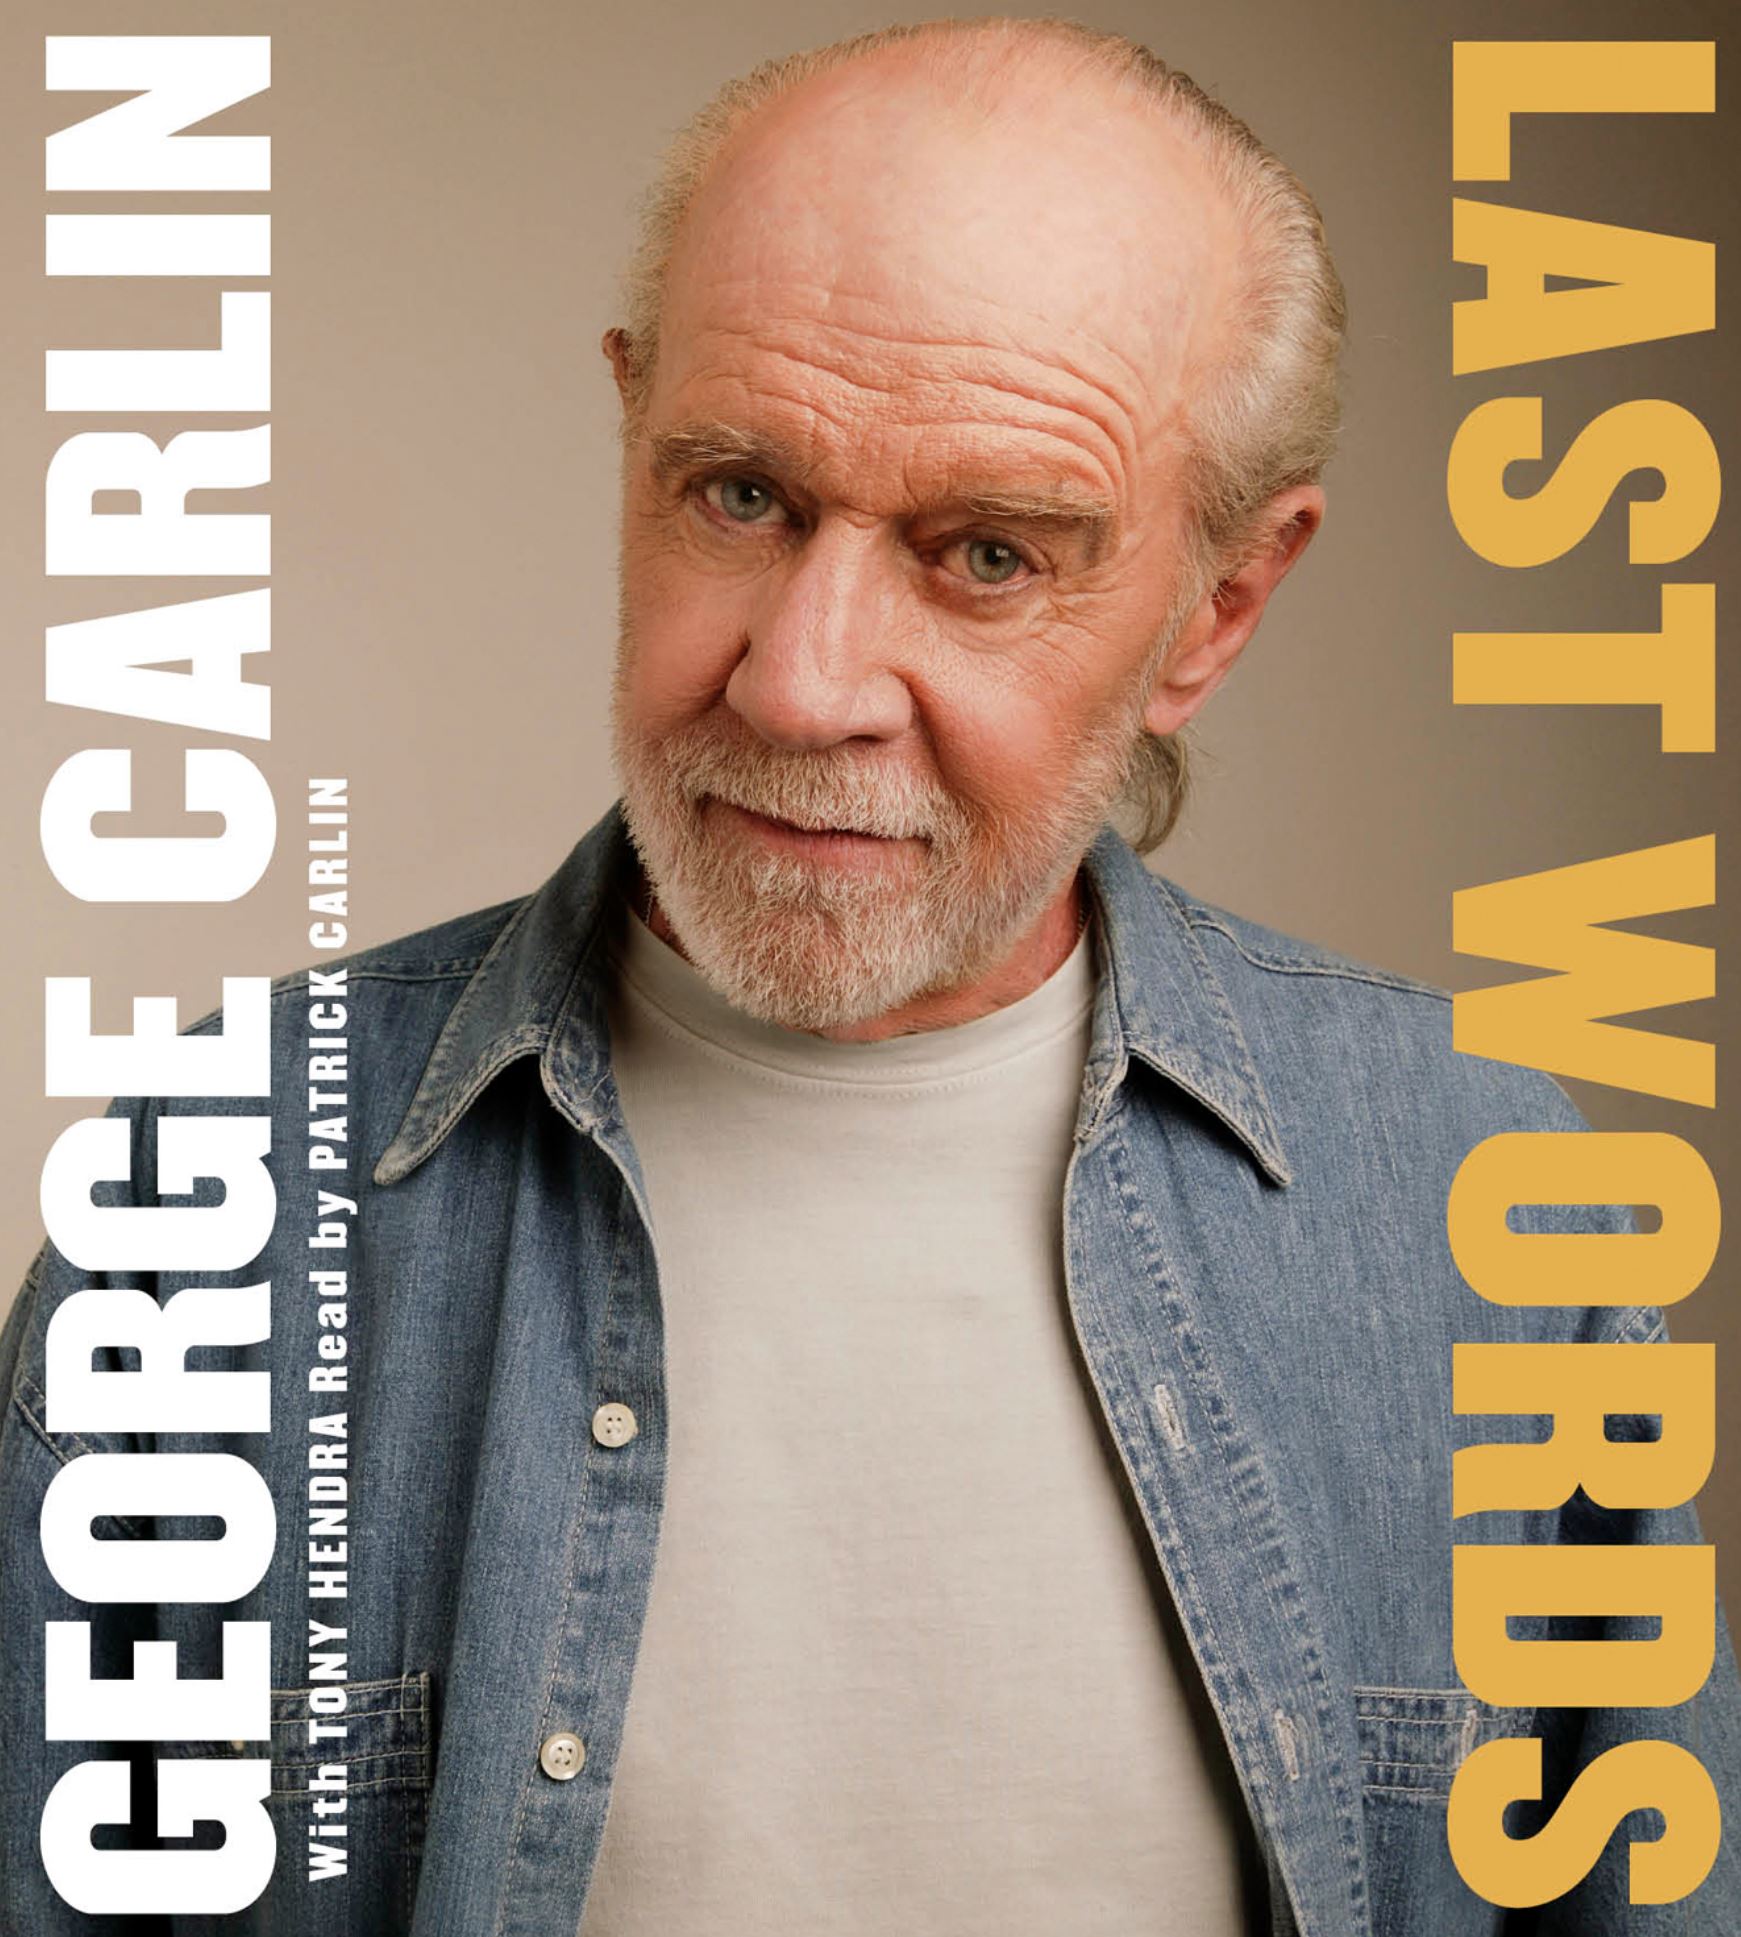 A late tribute to George Carlin